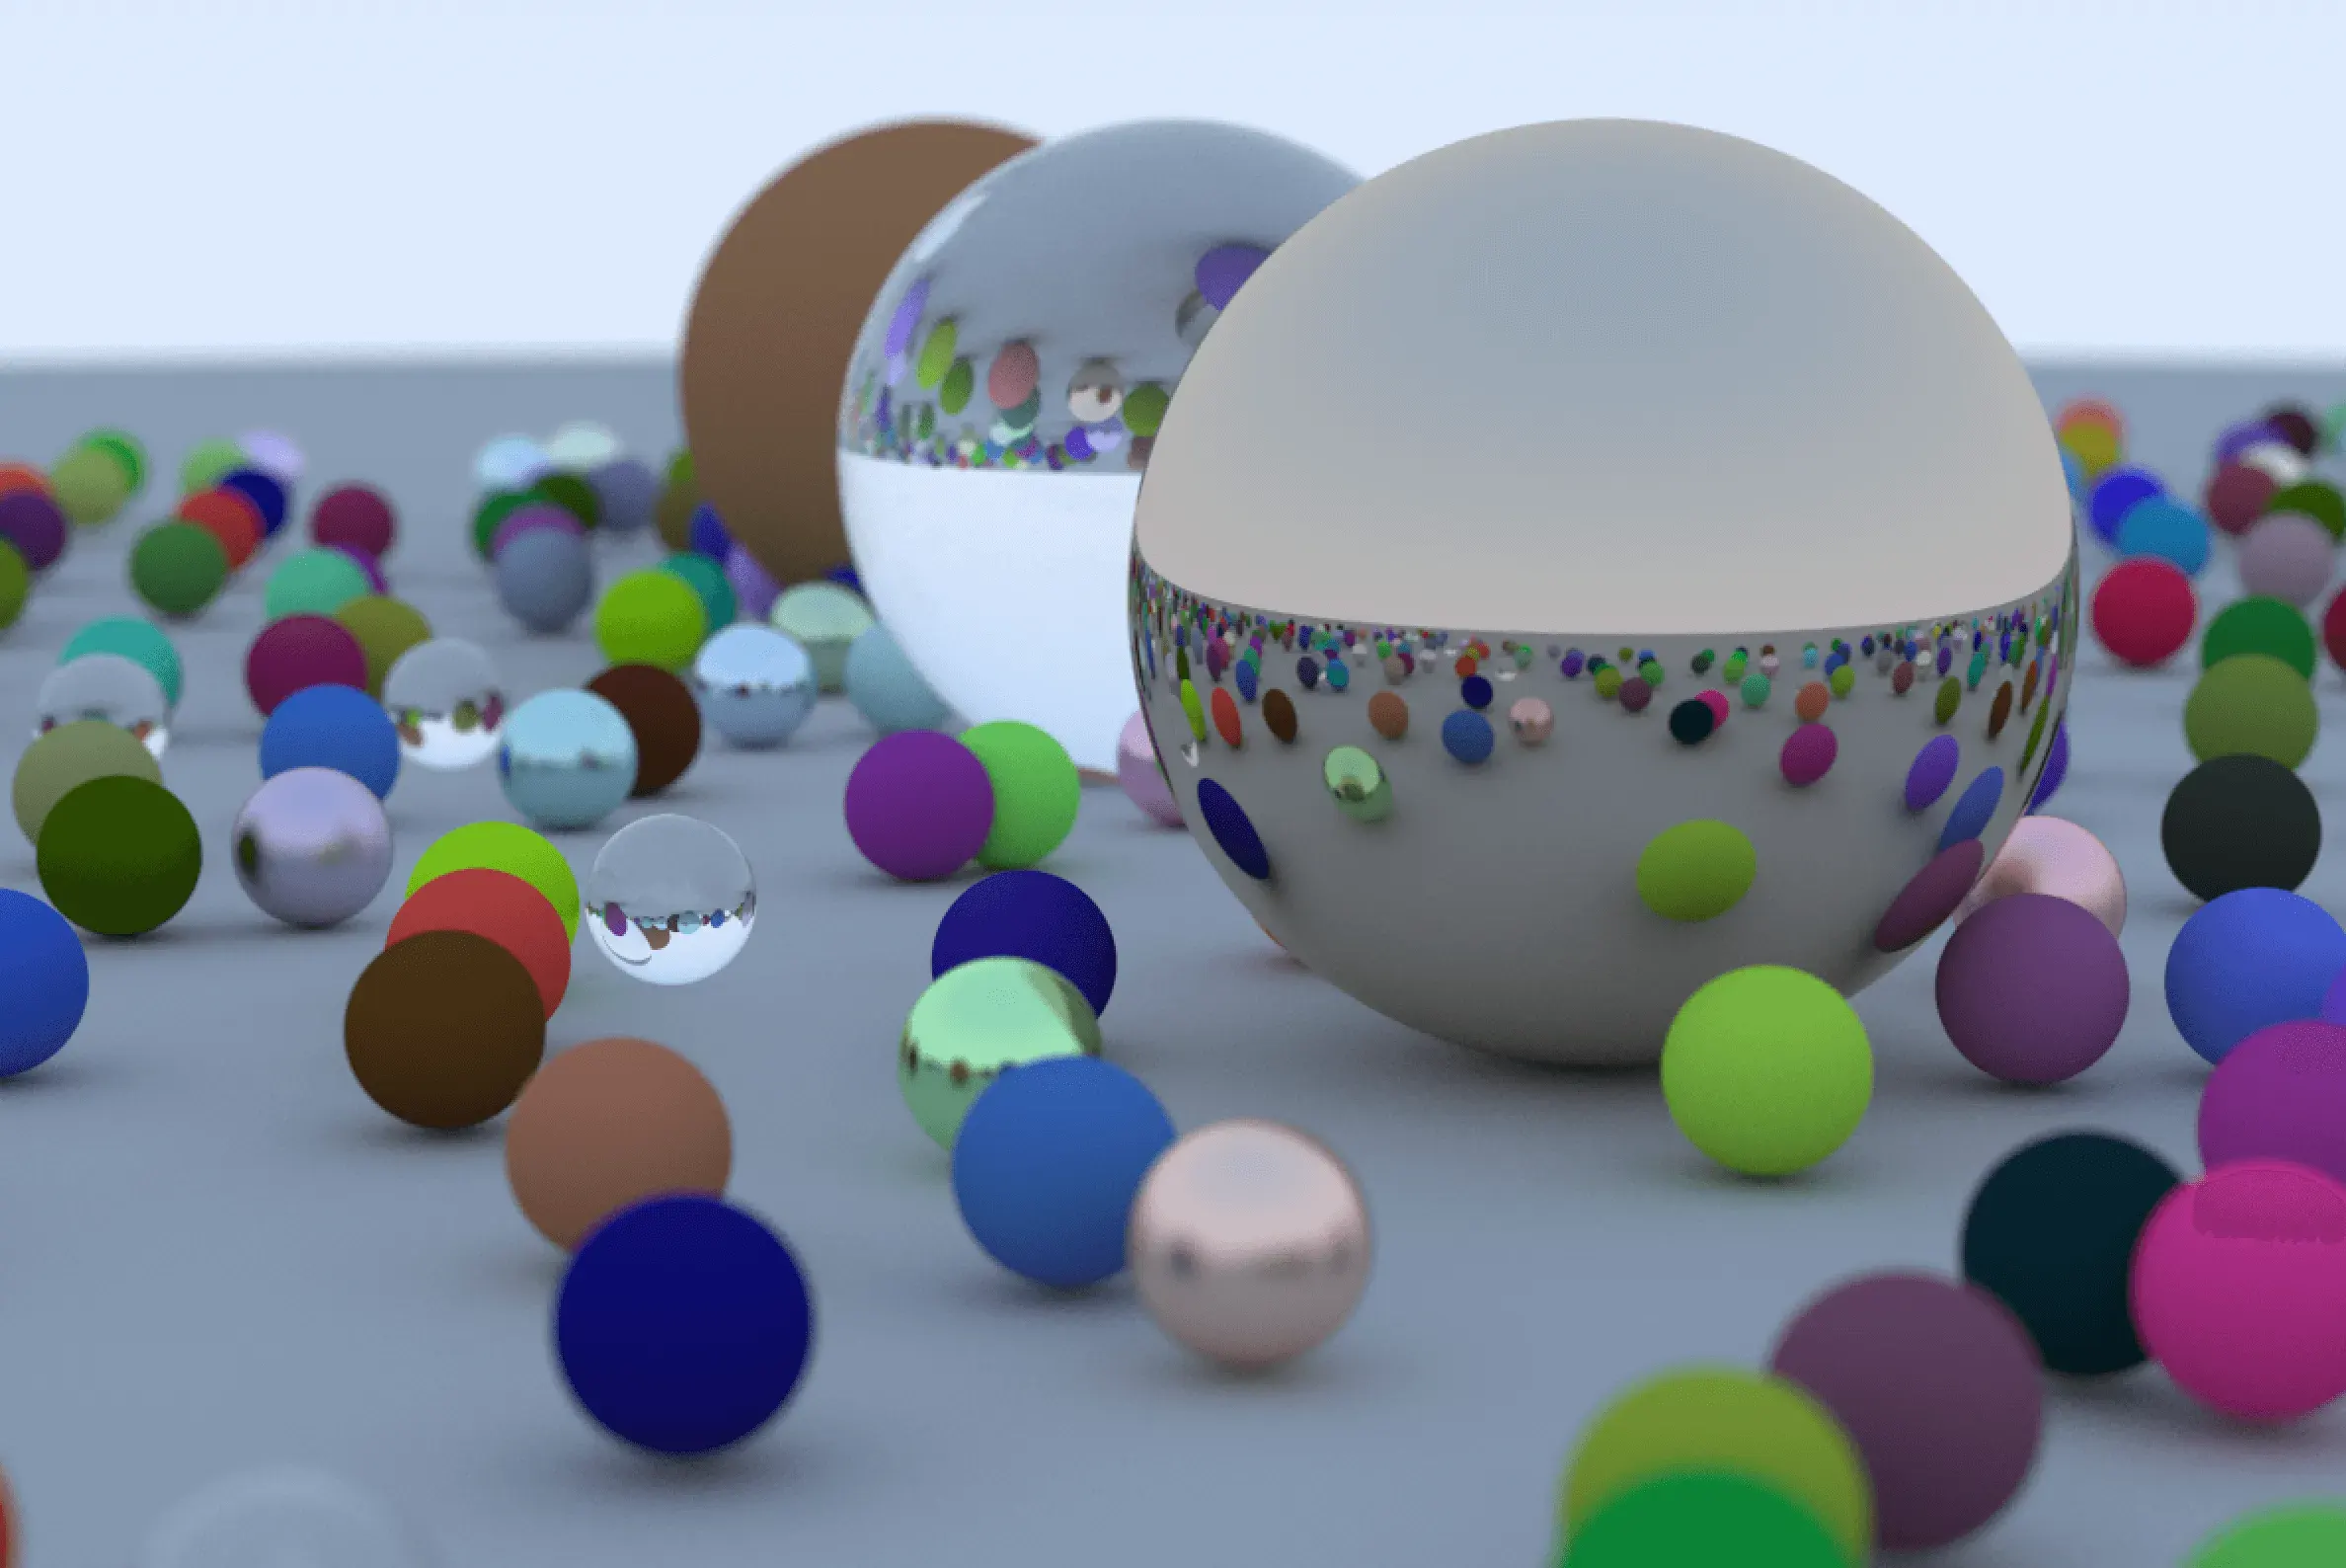 Software Raytracer